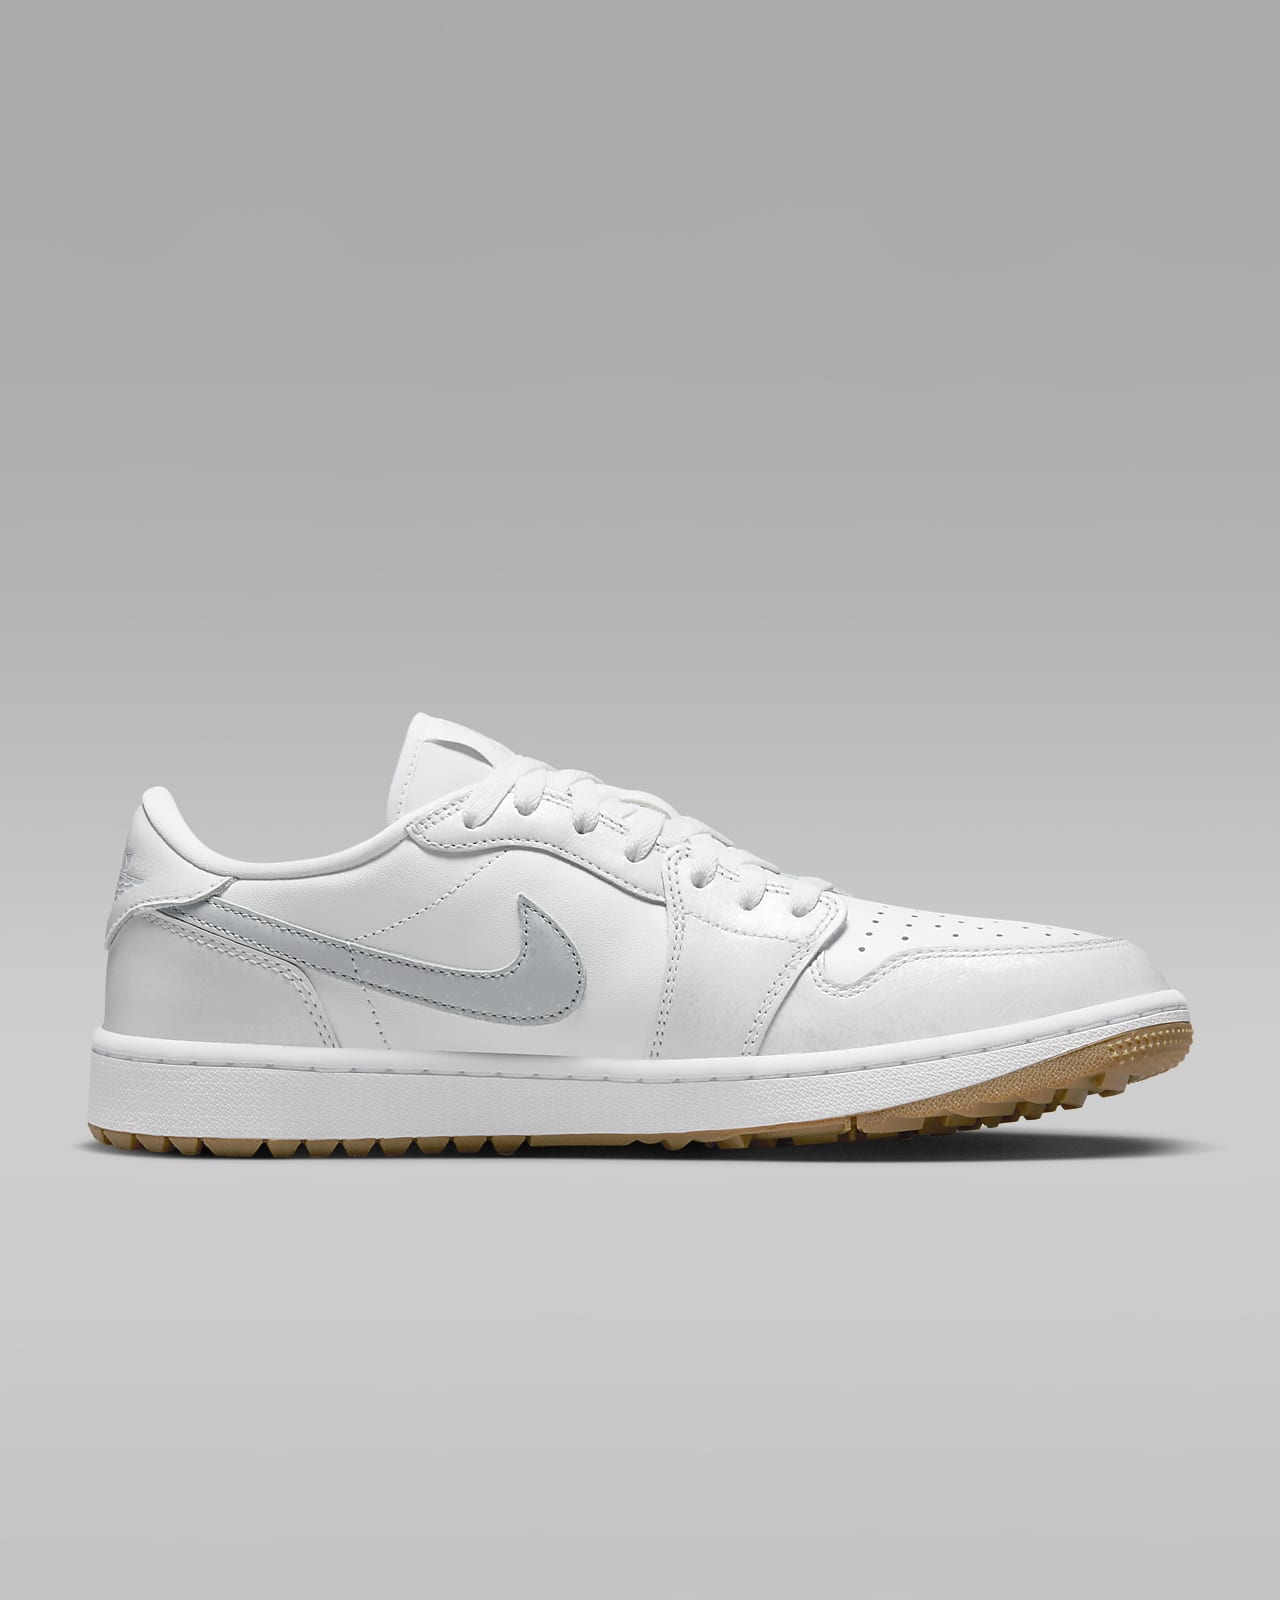 NIKE AIR JORDAN 1 LOW G - CHAUSSURE HOMME - Chaussures de golf Nike pour  homme - The Golf Square